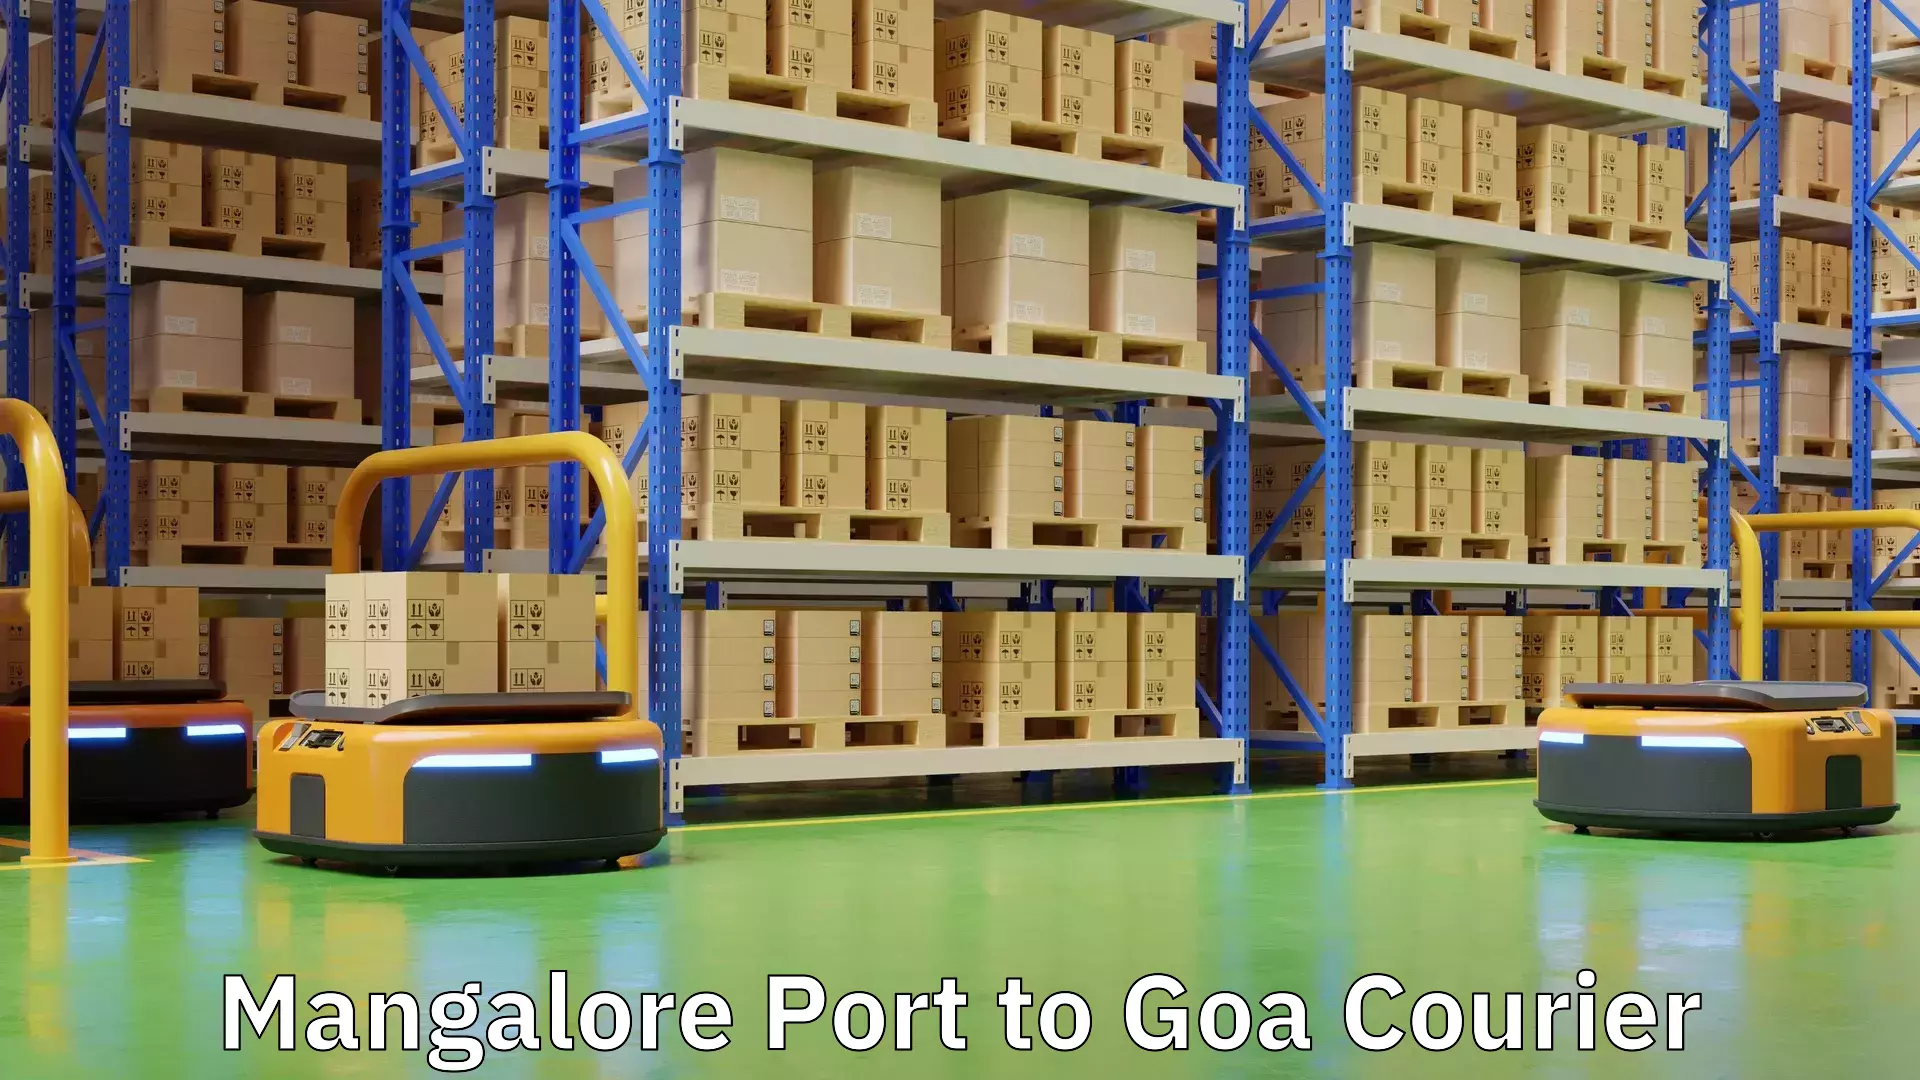 Weekend courier service in Mangalore Port to Goa